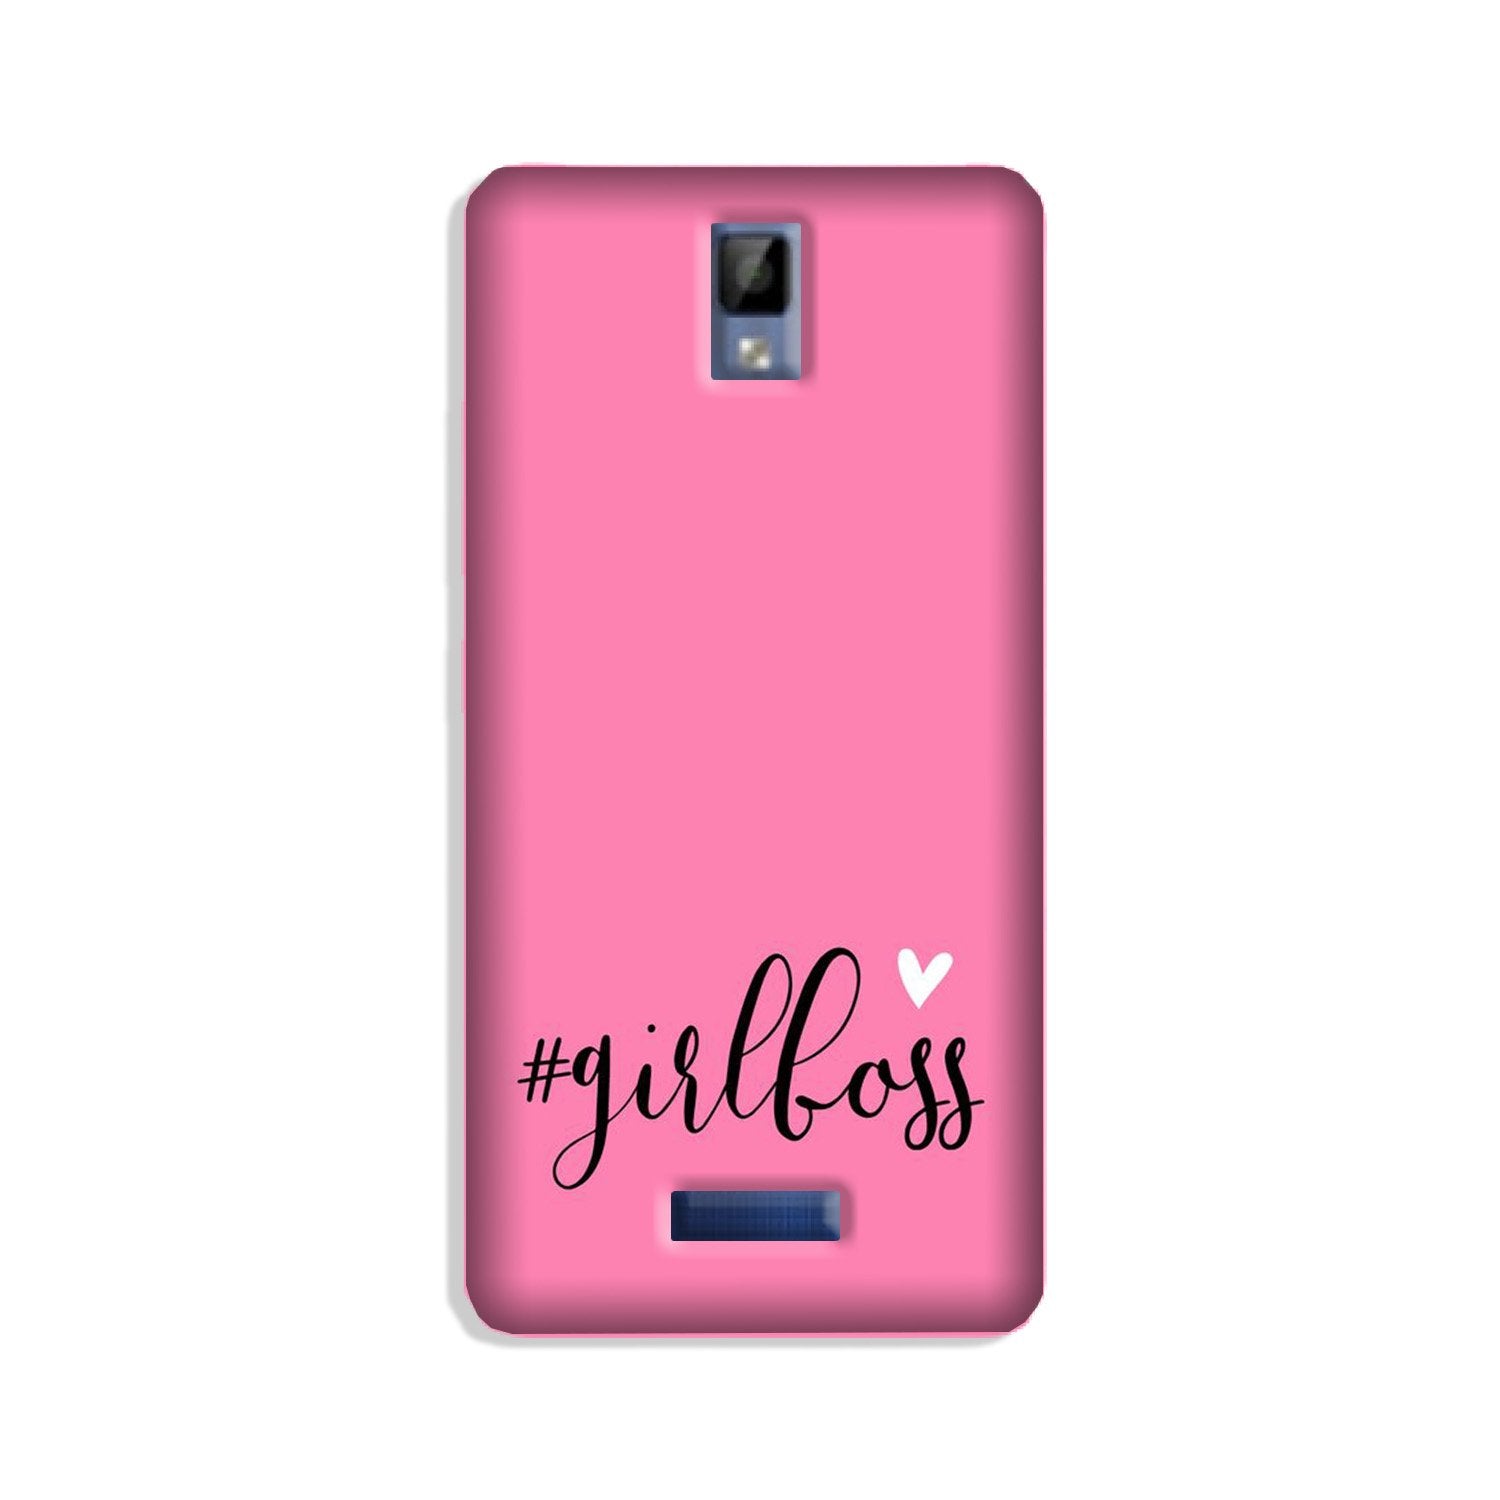 Girl Boss Pink Case for Gionee P7 (Design No. 269)